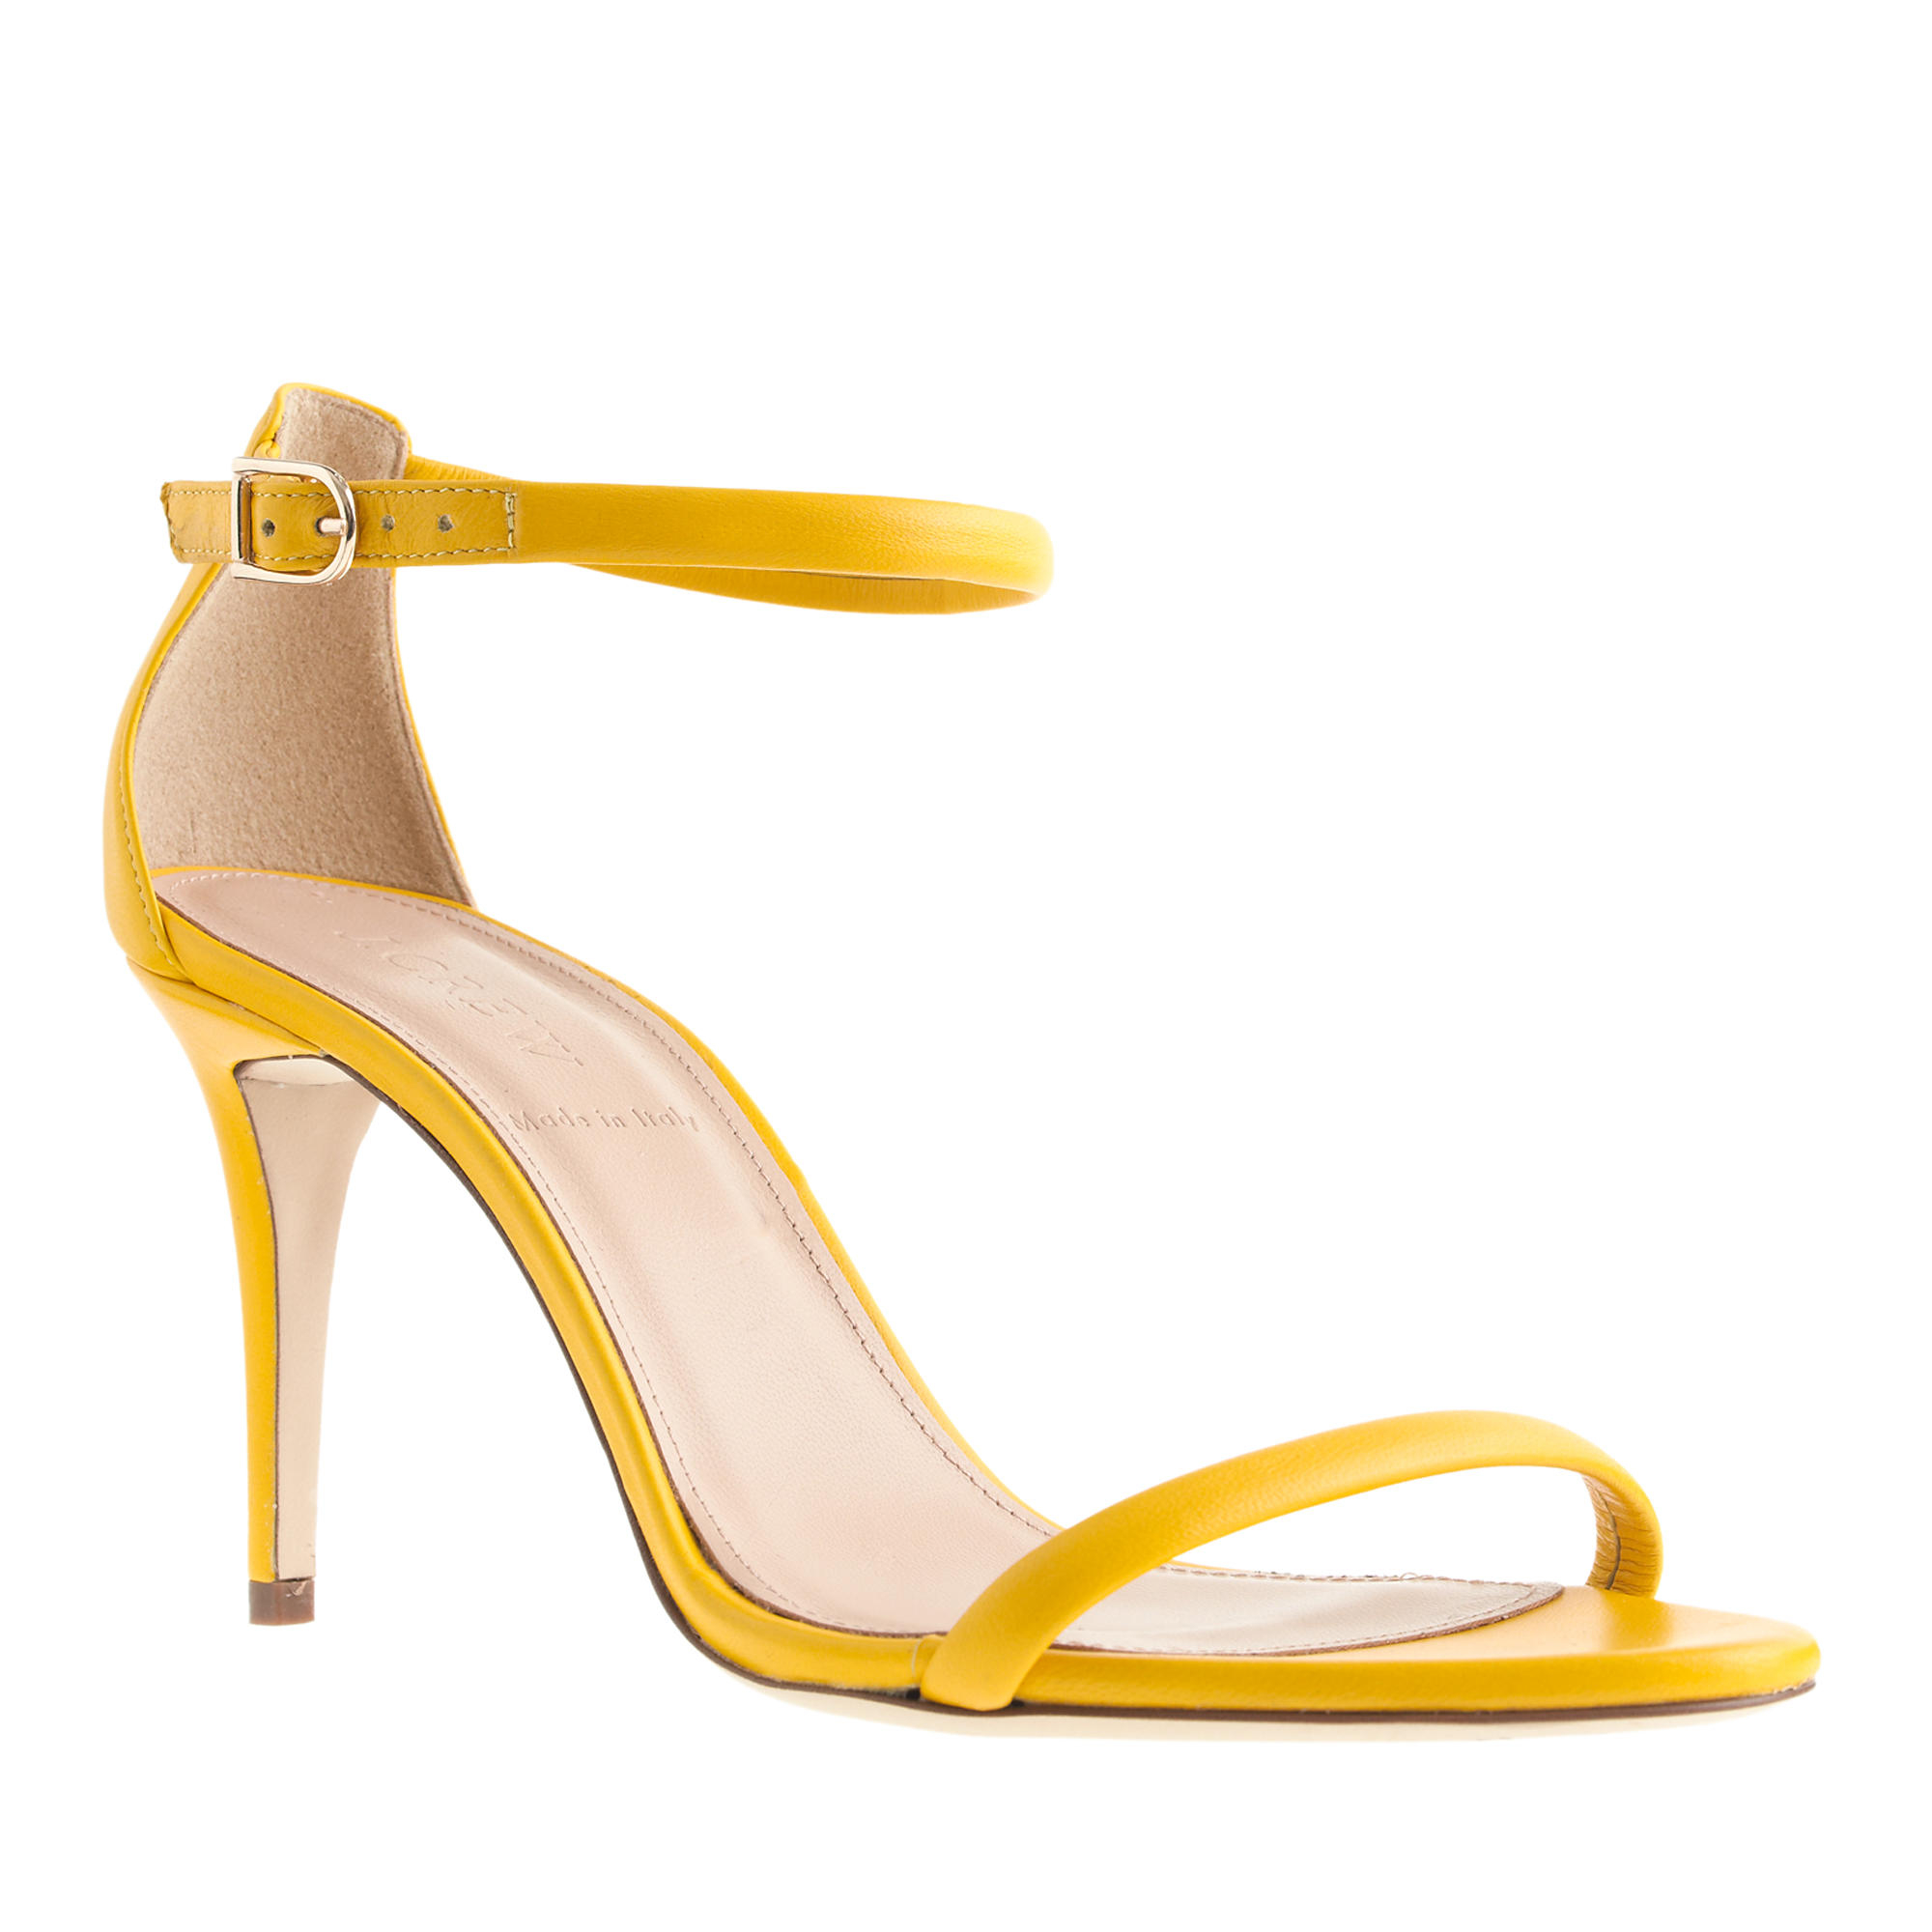 J.Crew Strappy High-heel Sandals in Yellow - Lyst